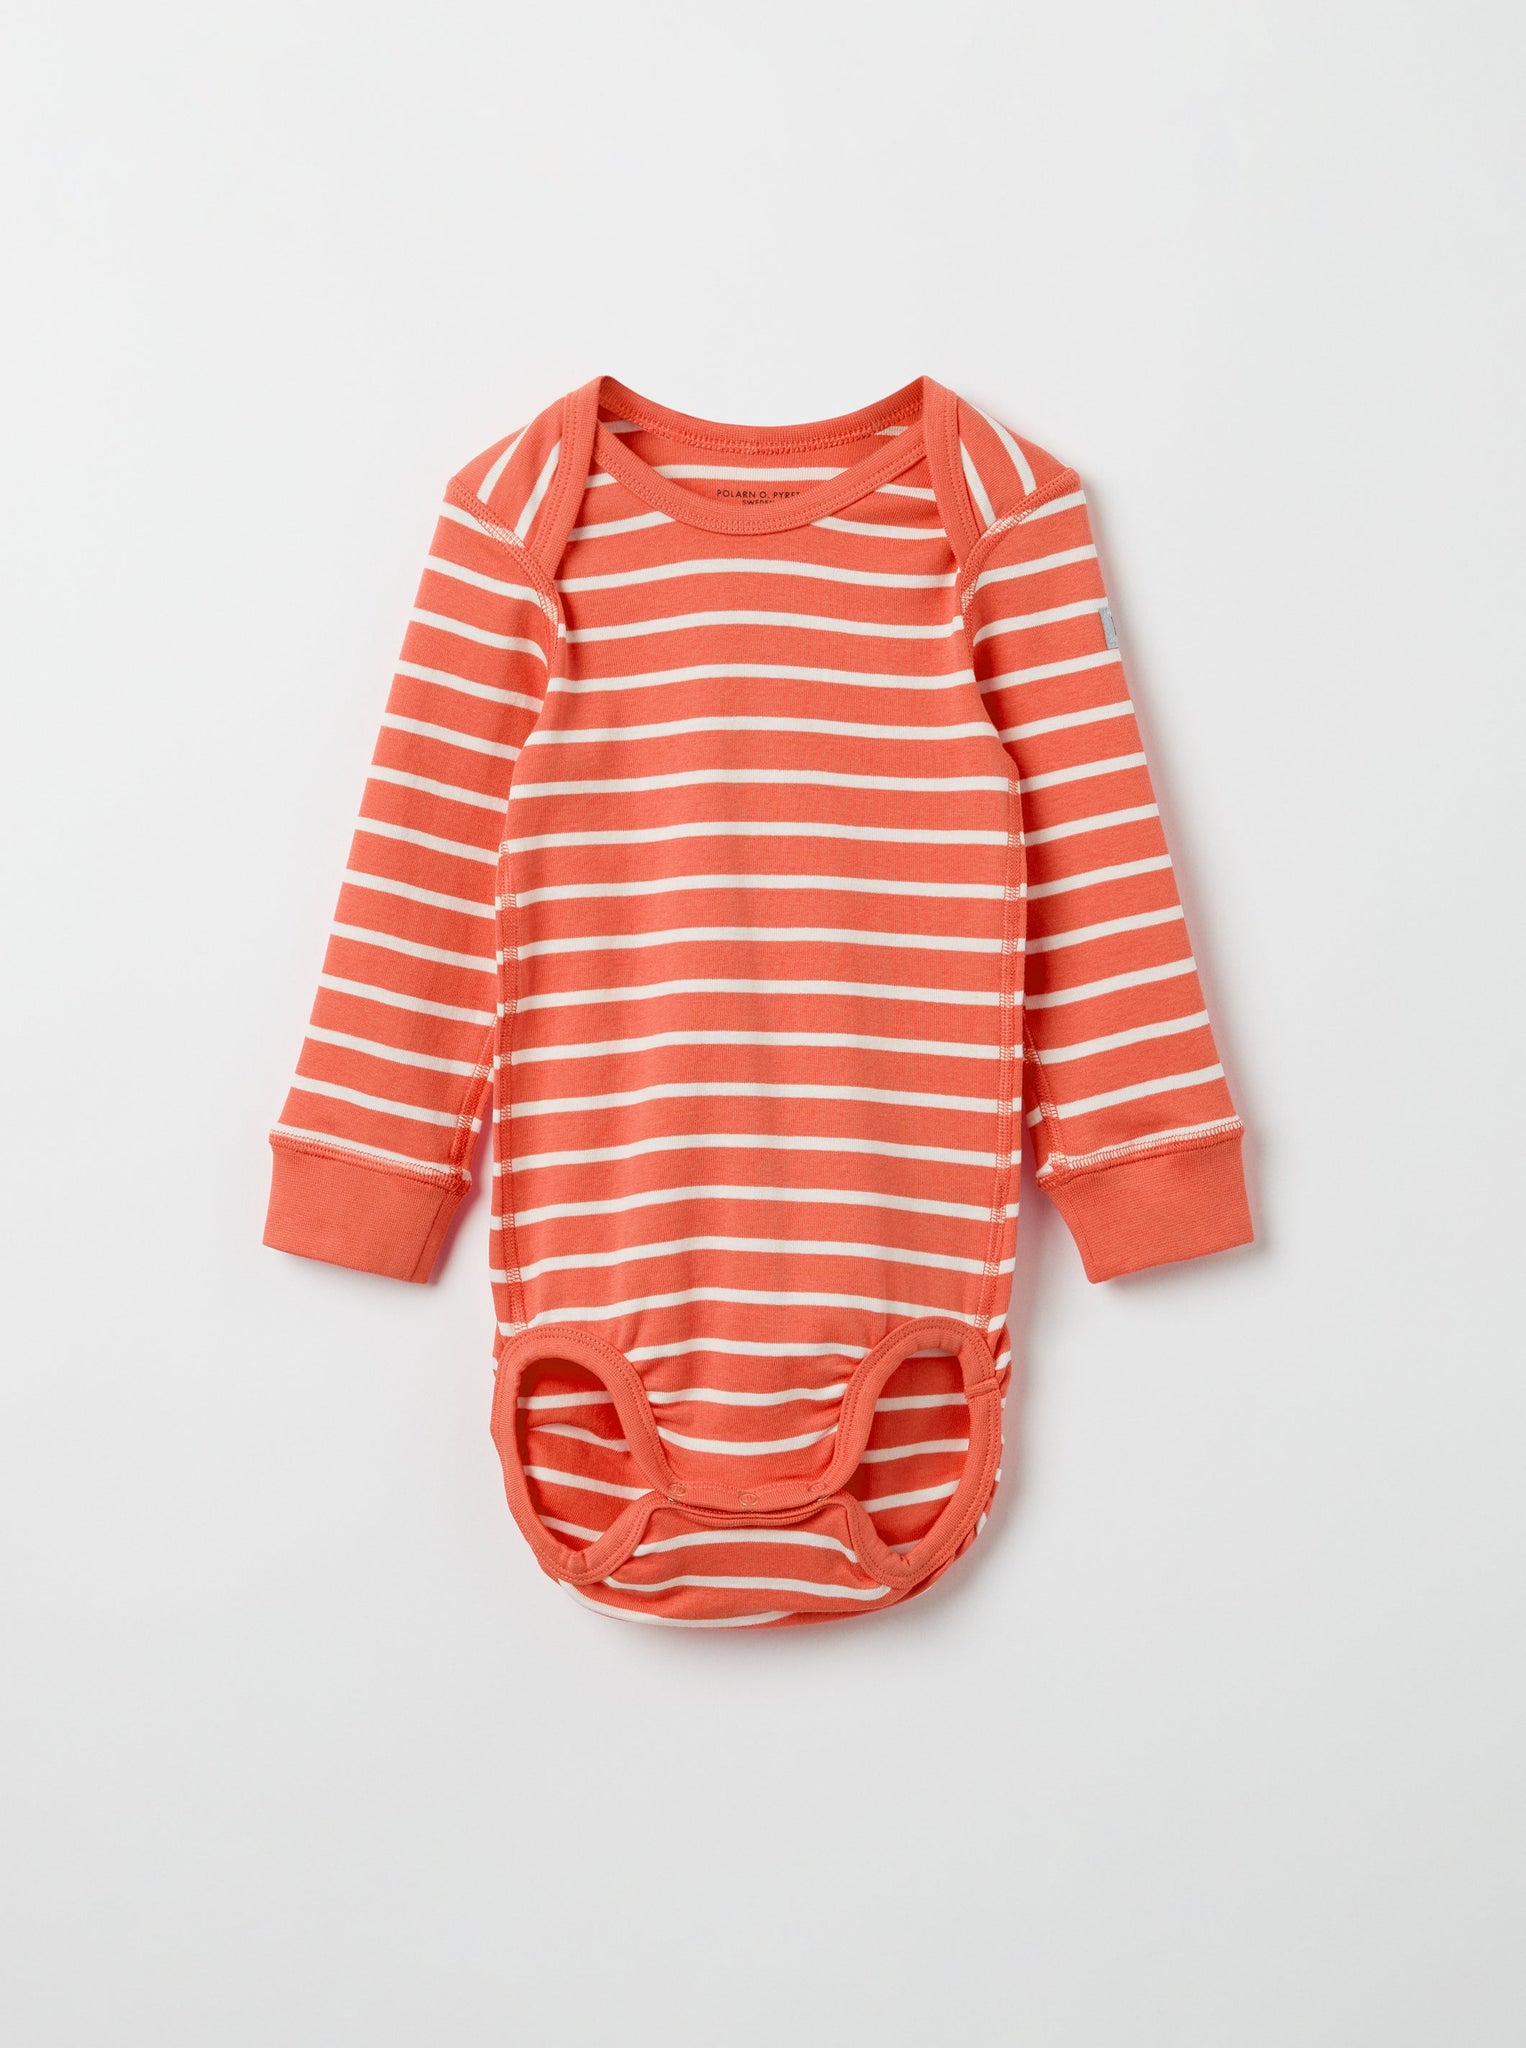 Striped Organic Cotton Orange Babygrow from the Polarn O. Pyret babywear collection. Nordic baby clothes made from sustainable sources.